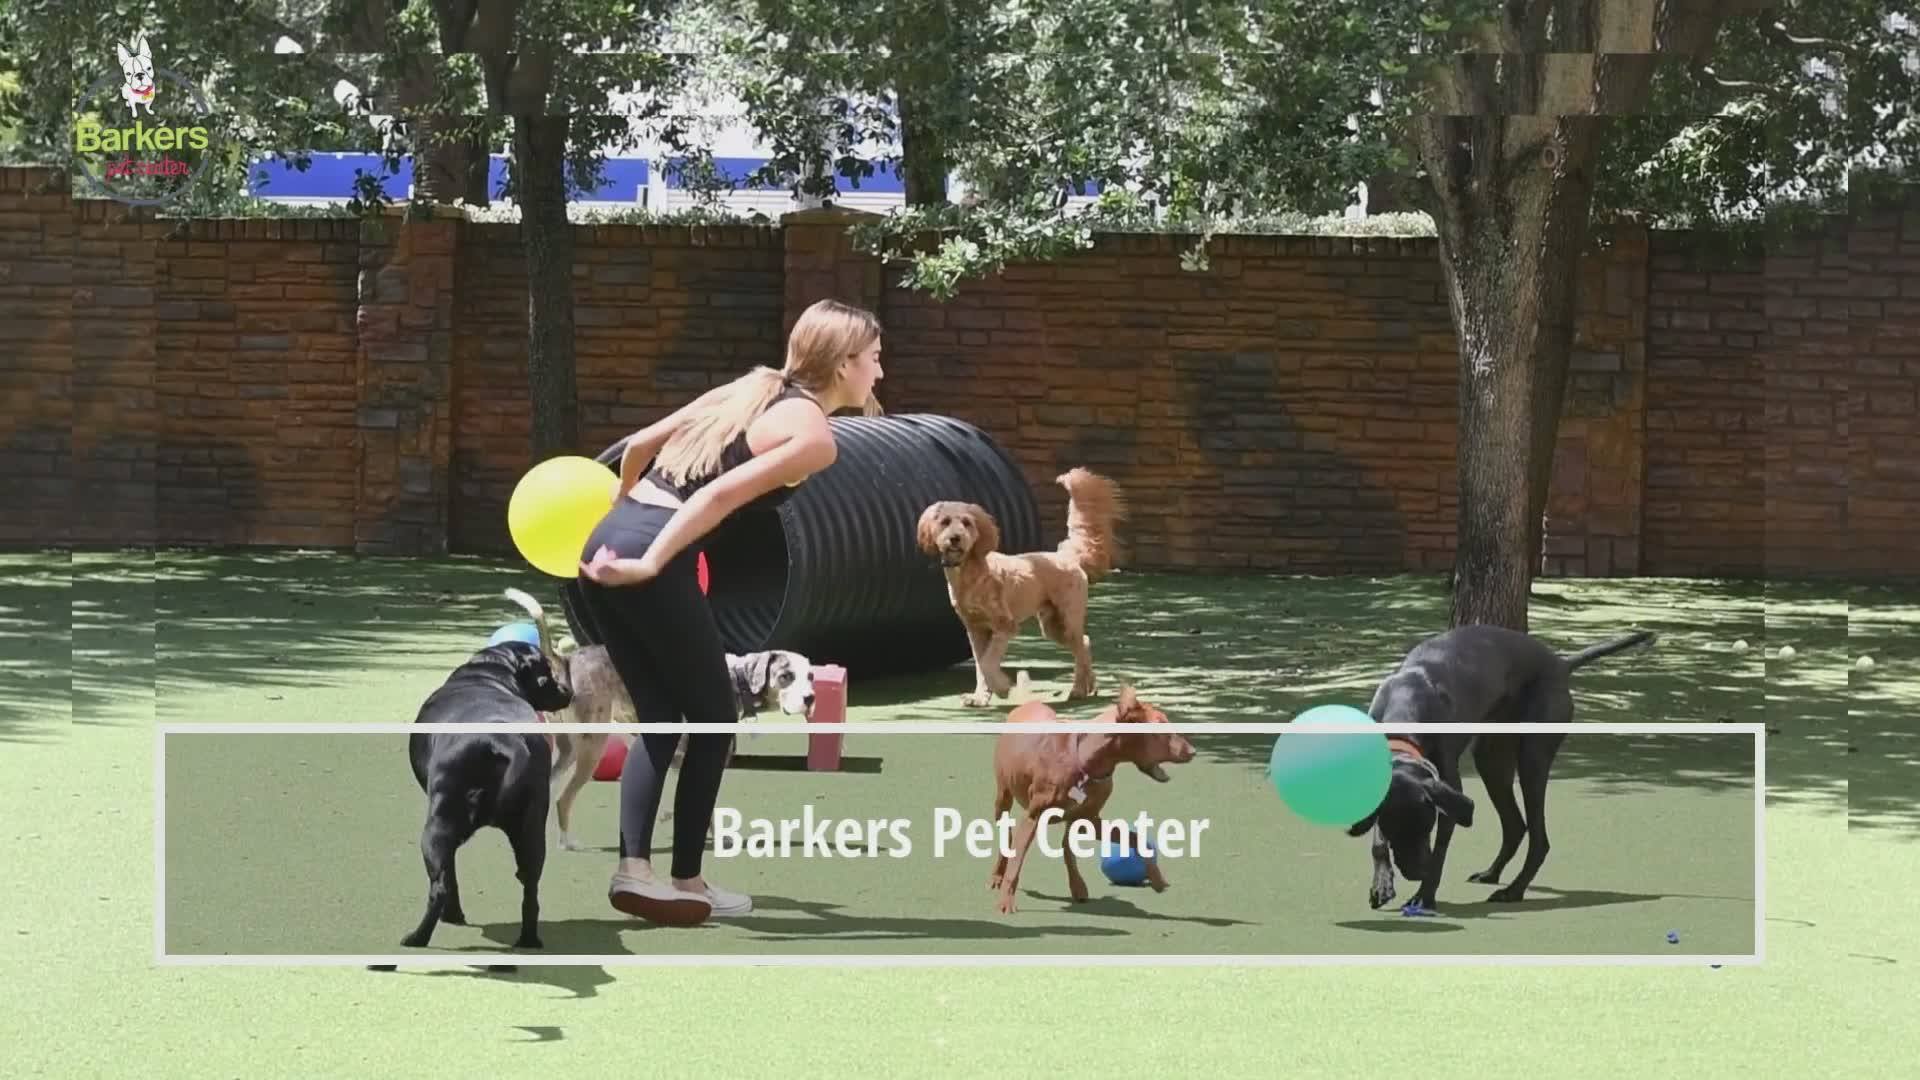 The Barkers Pet Center